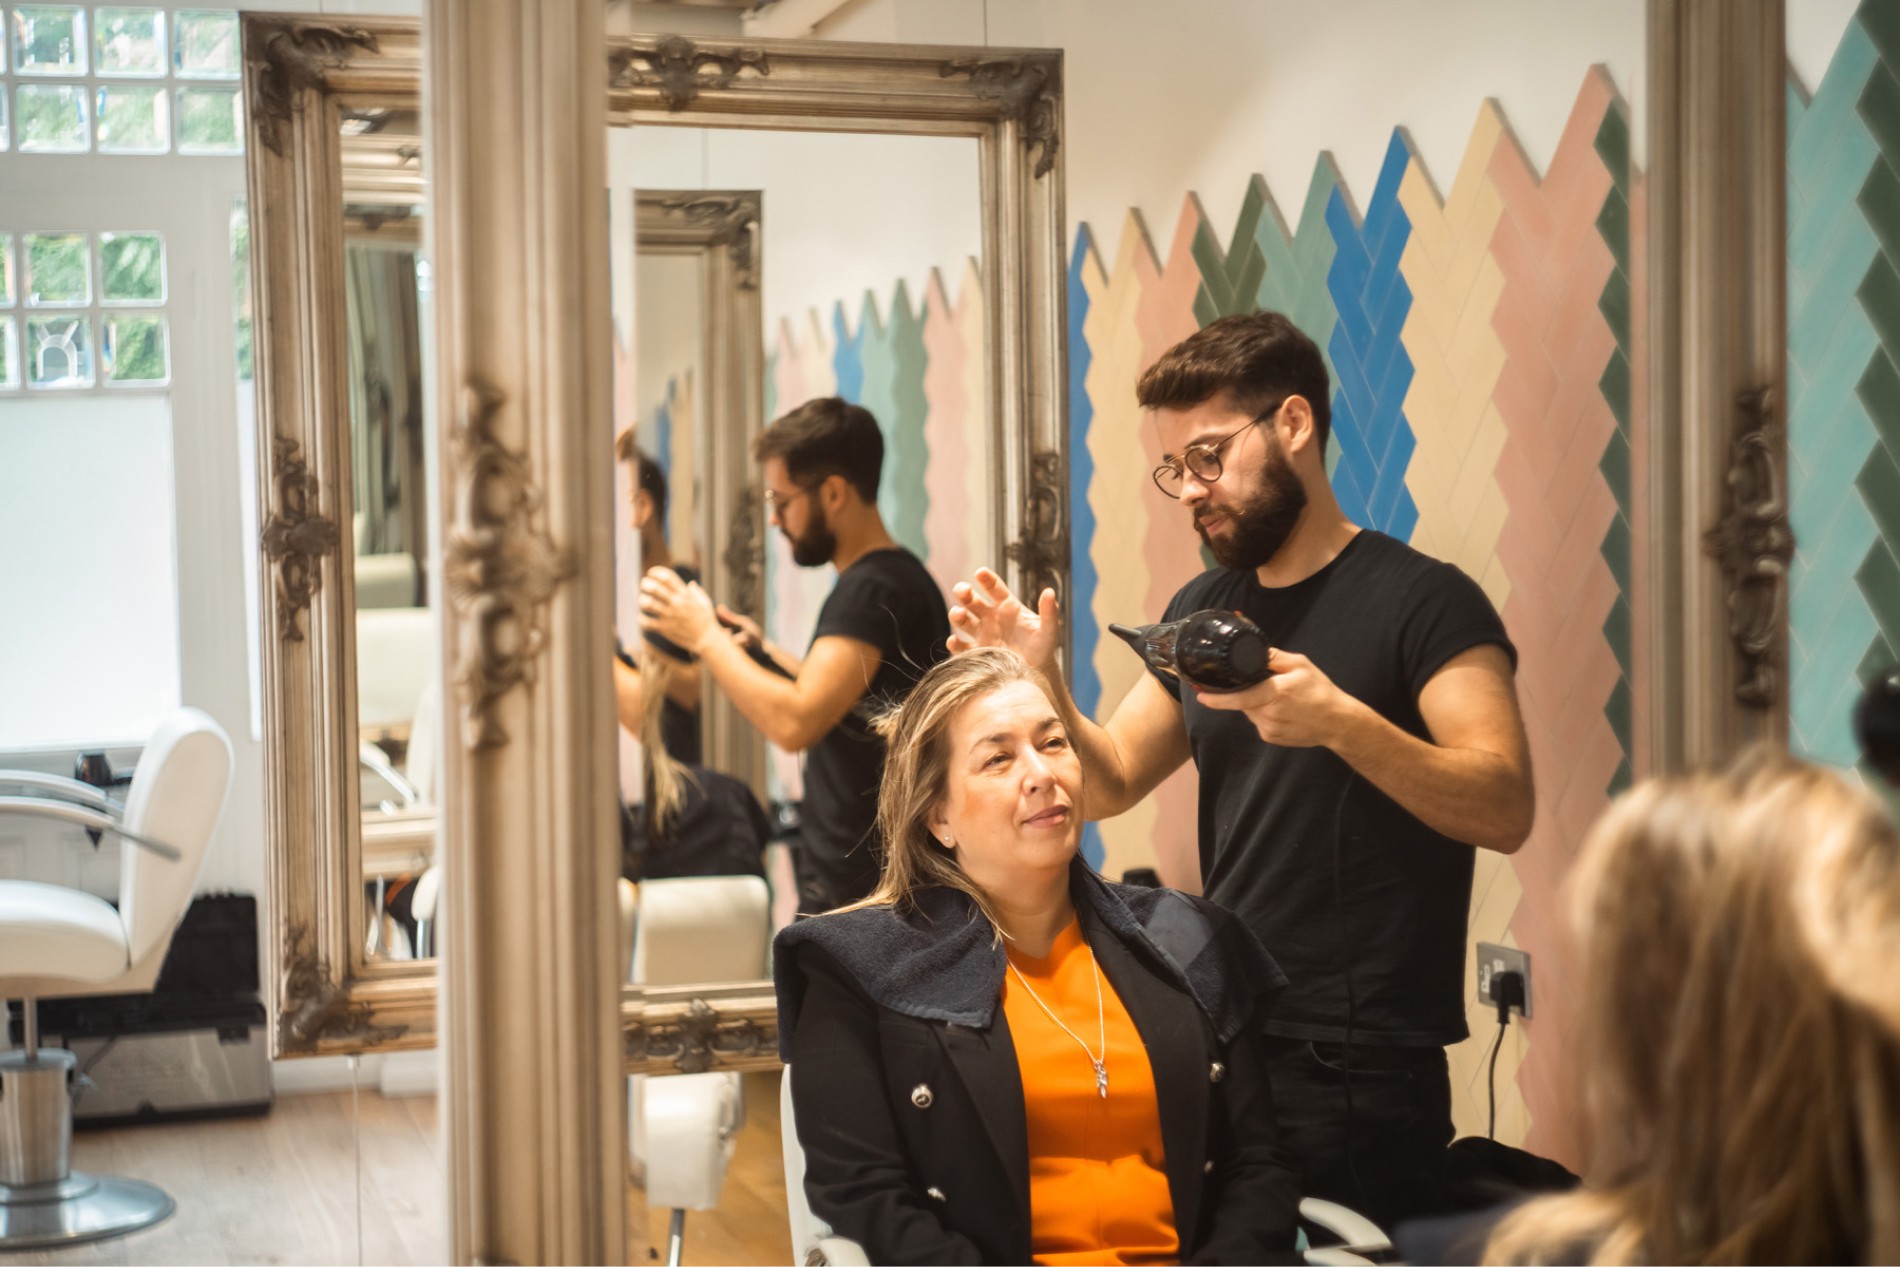 A stylist in front of a mirror, blow drying a guests hair